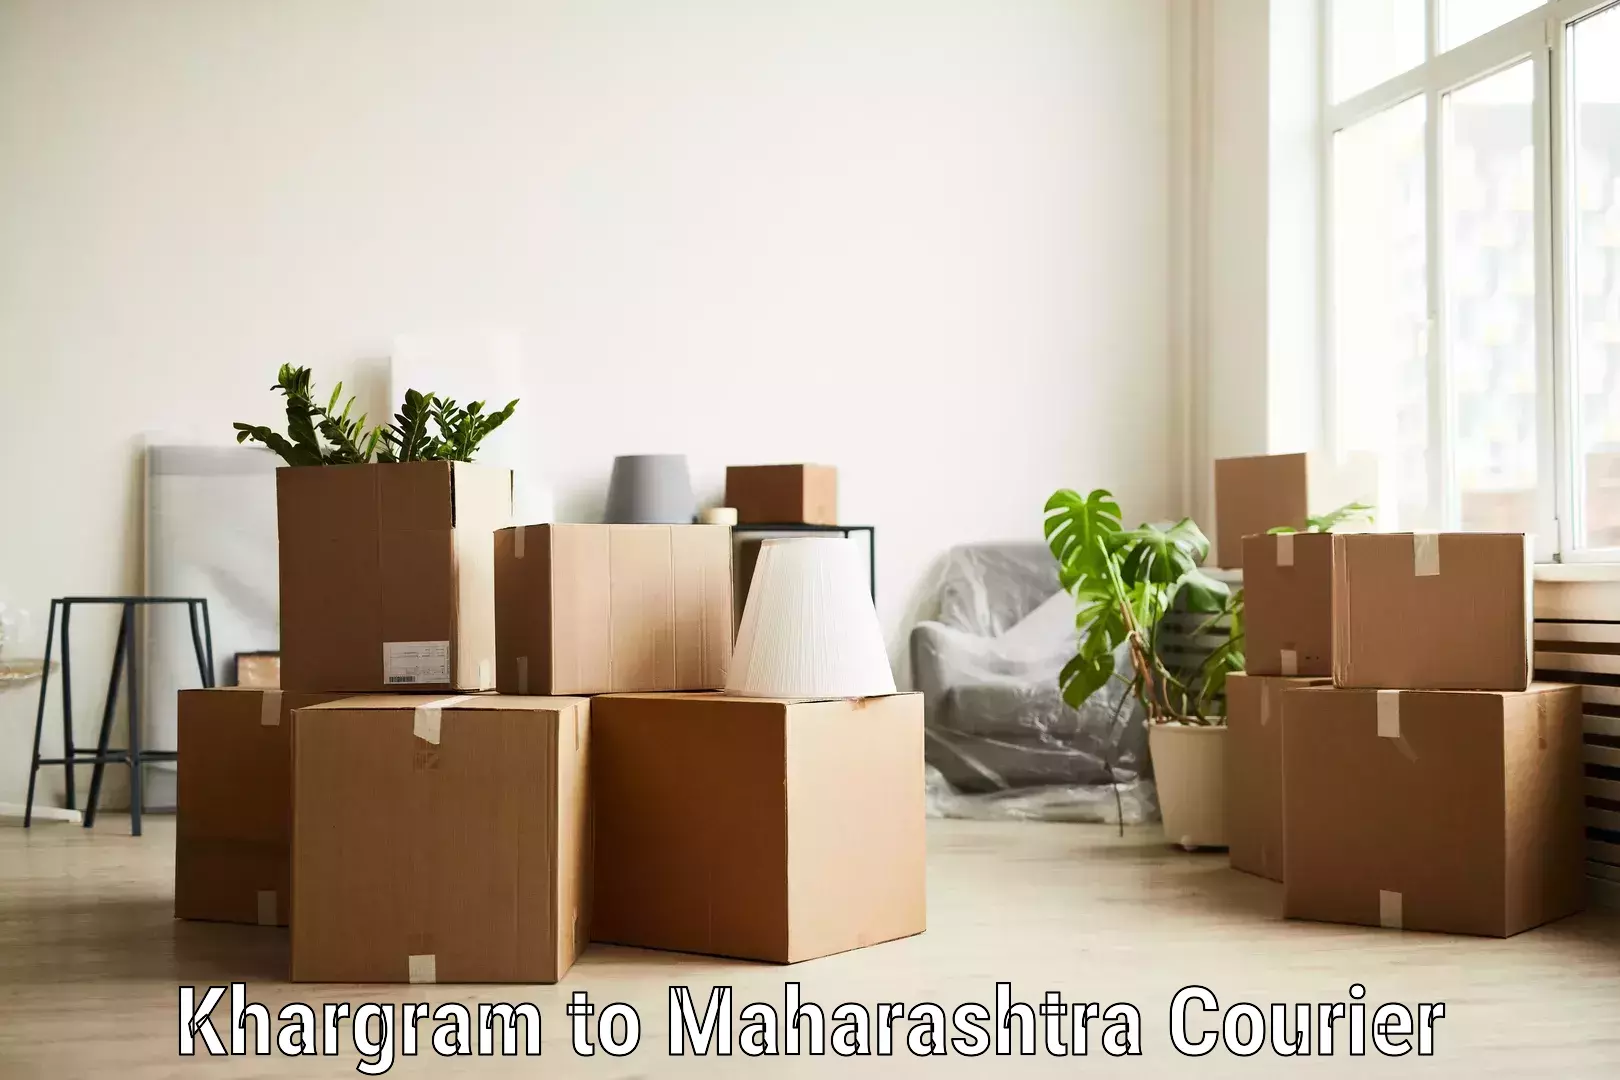 State-of-the-art courier technology Khargram to Ambarnath